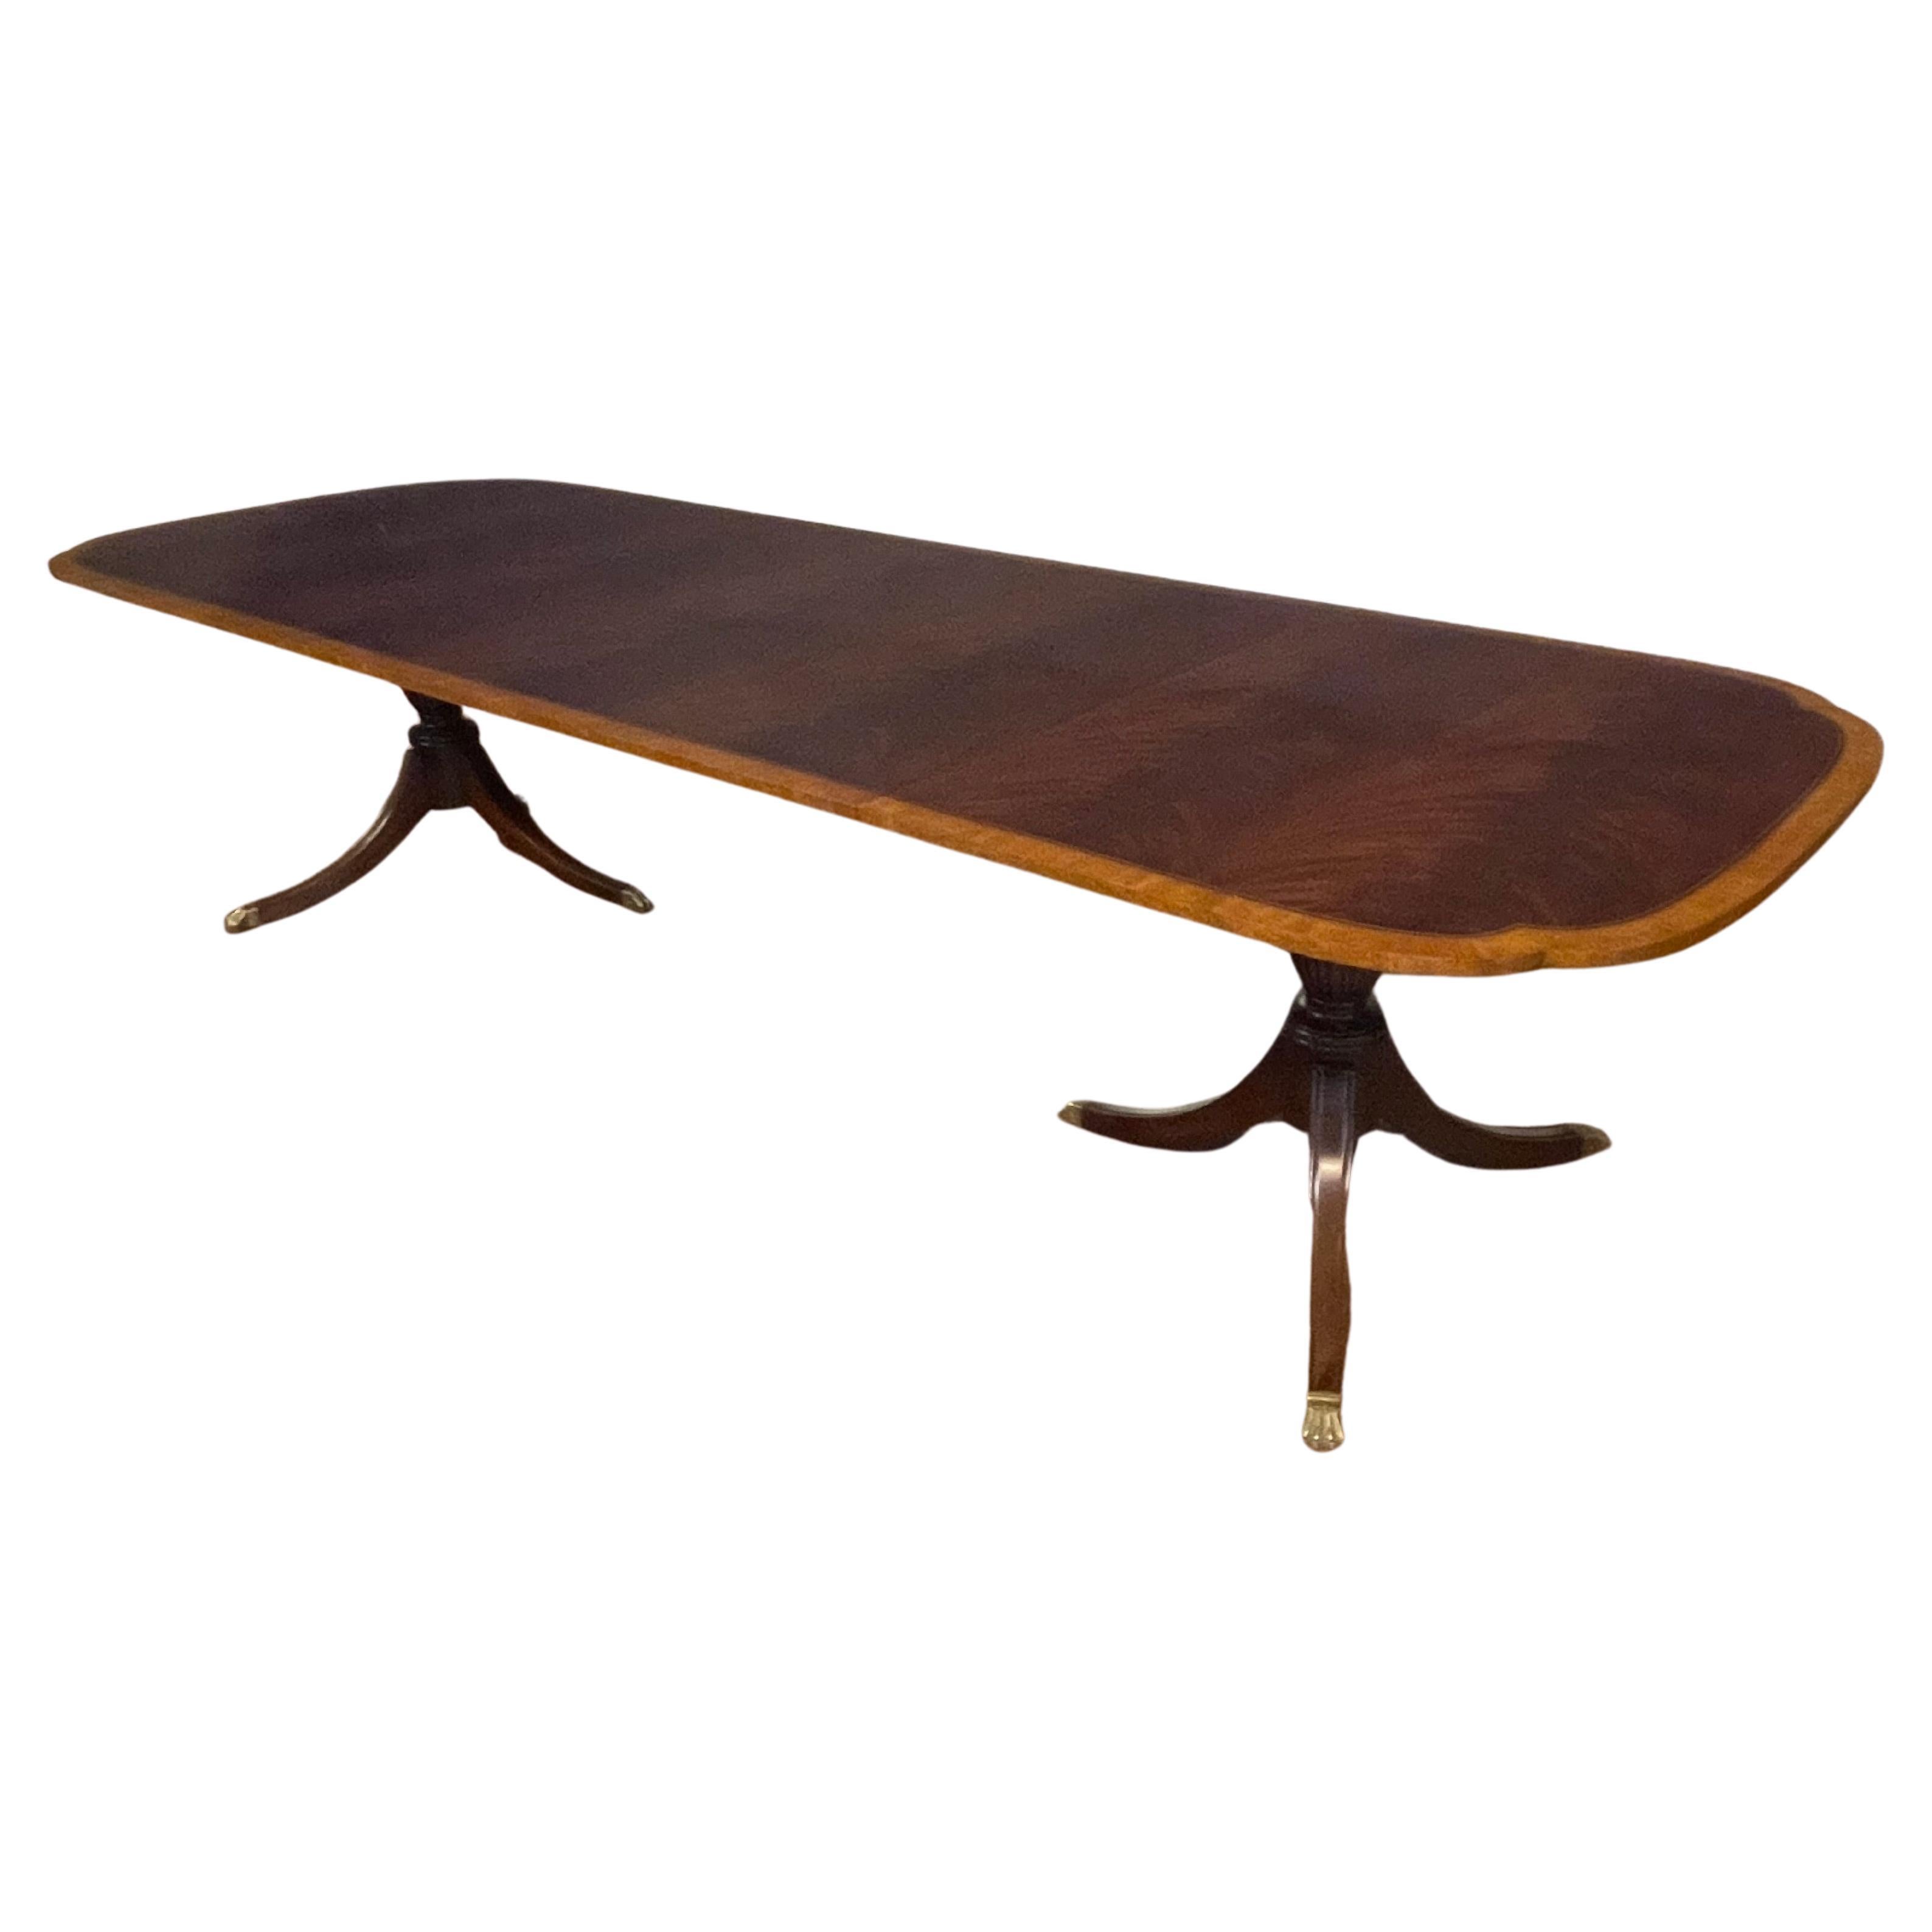 Mahogany Scallop Cornered Dining Table by Leighton Hall - Showroom Sample